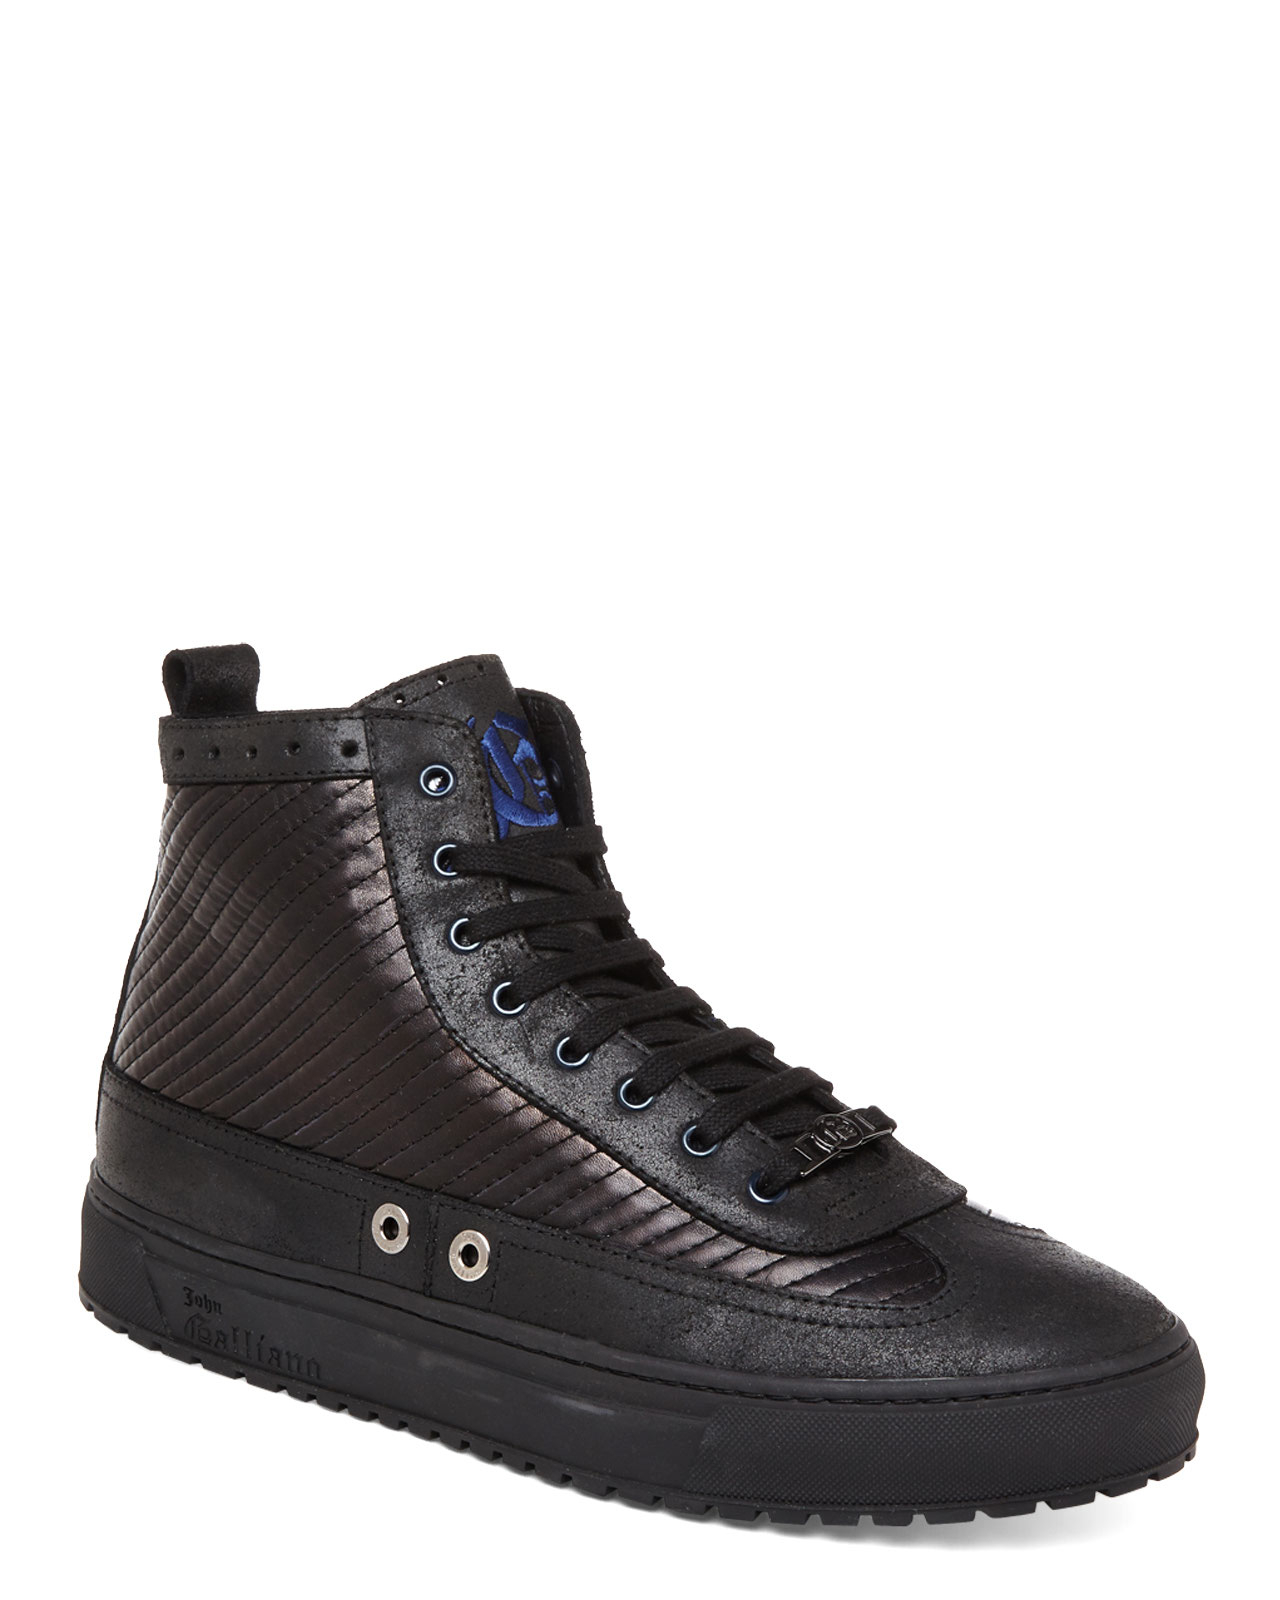 John galliano Quilted High-Top Sneakers in Black for Men | Lyst